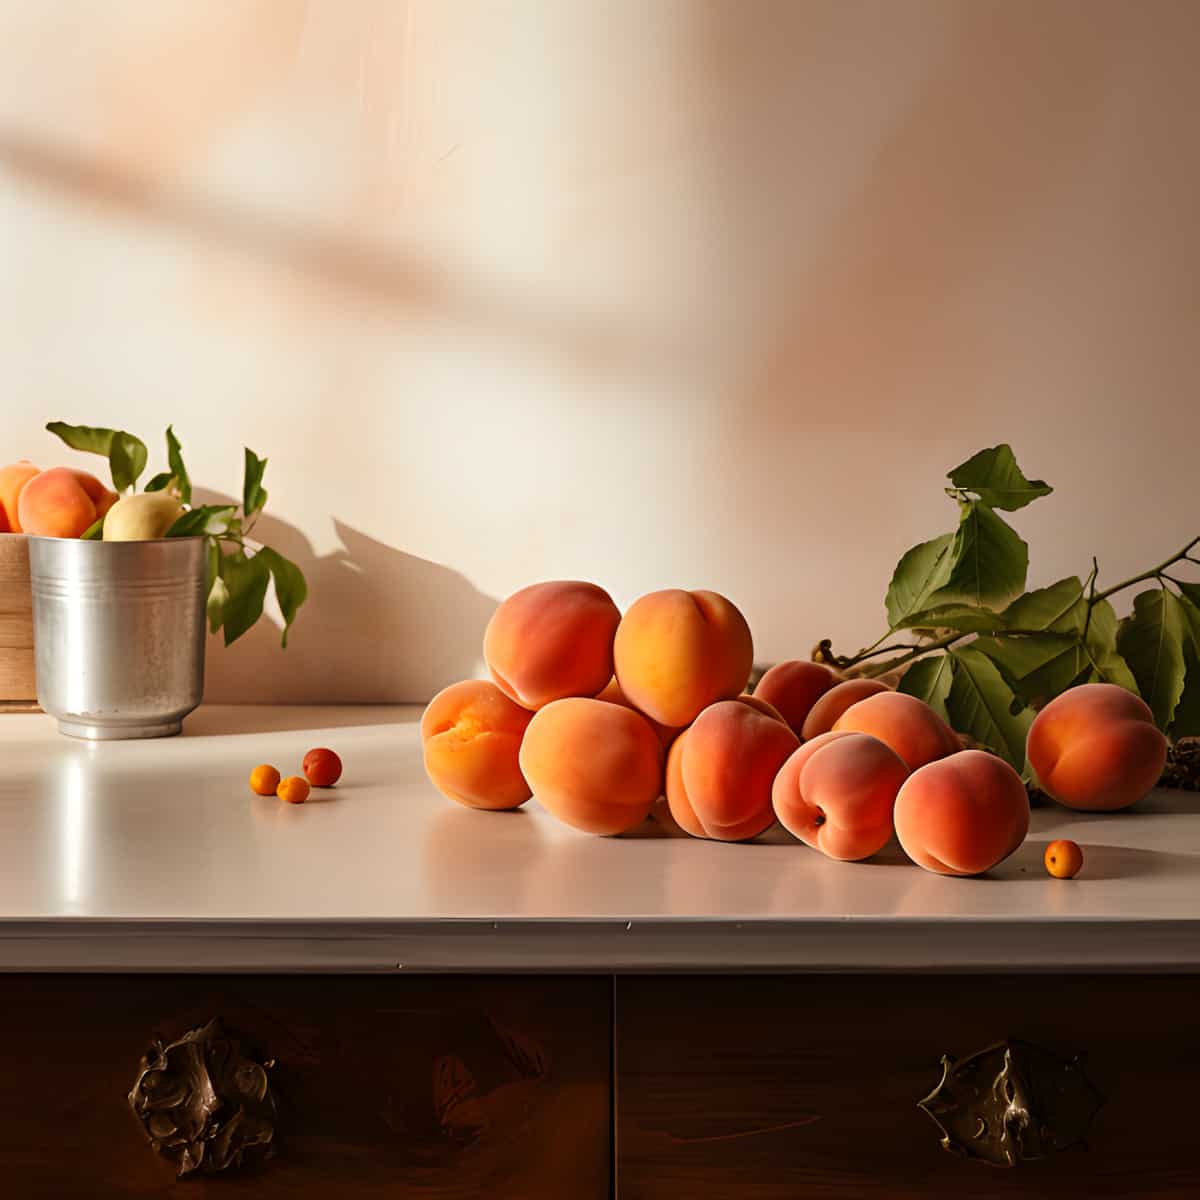 Apricot on a kitchen counter